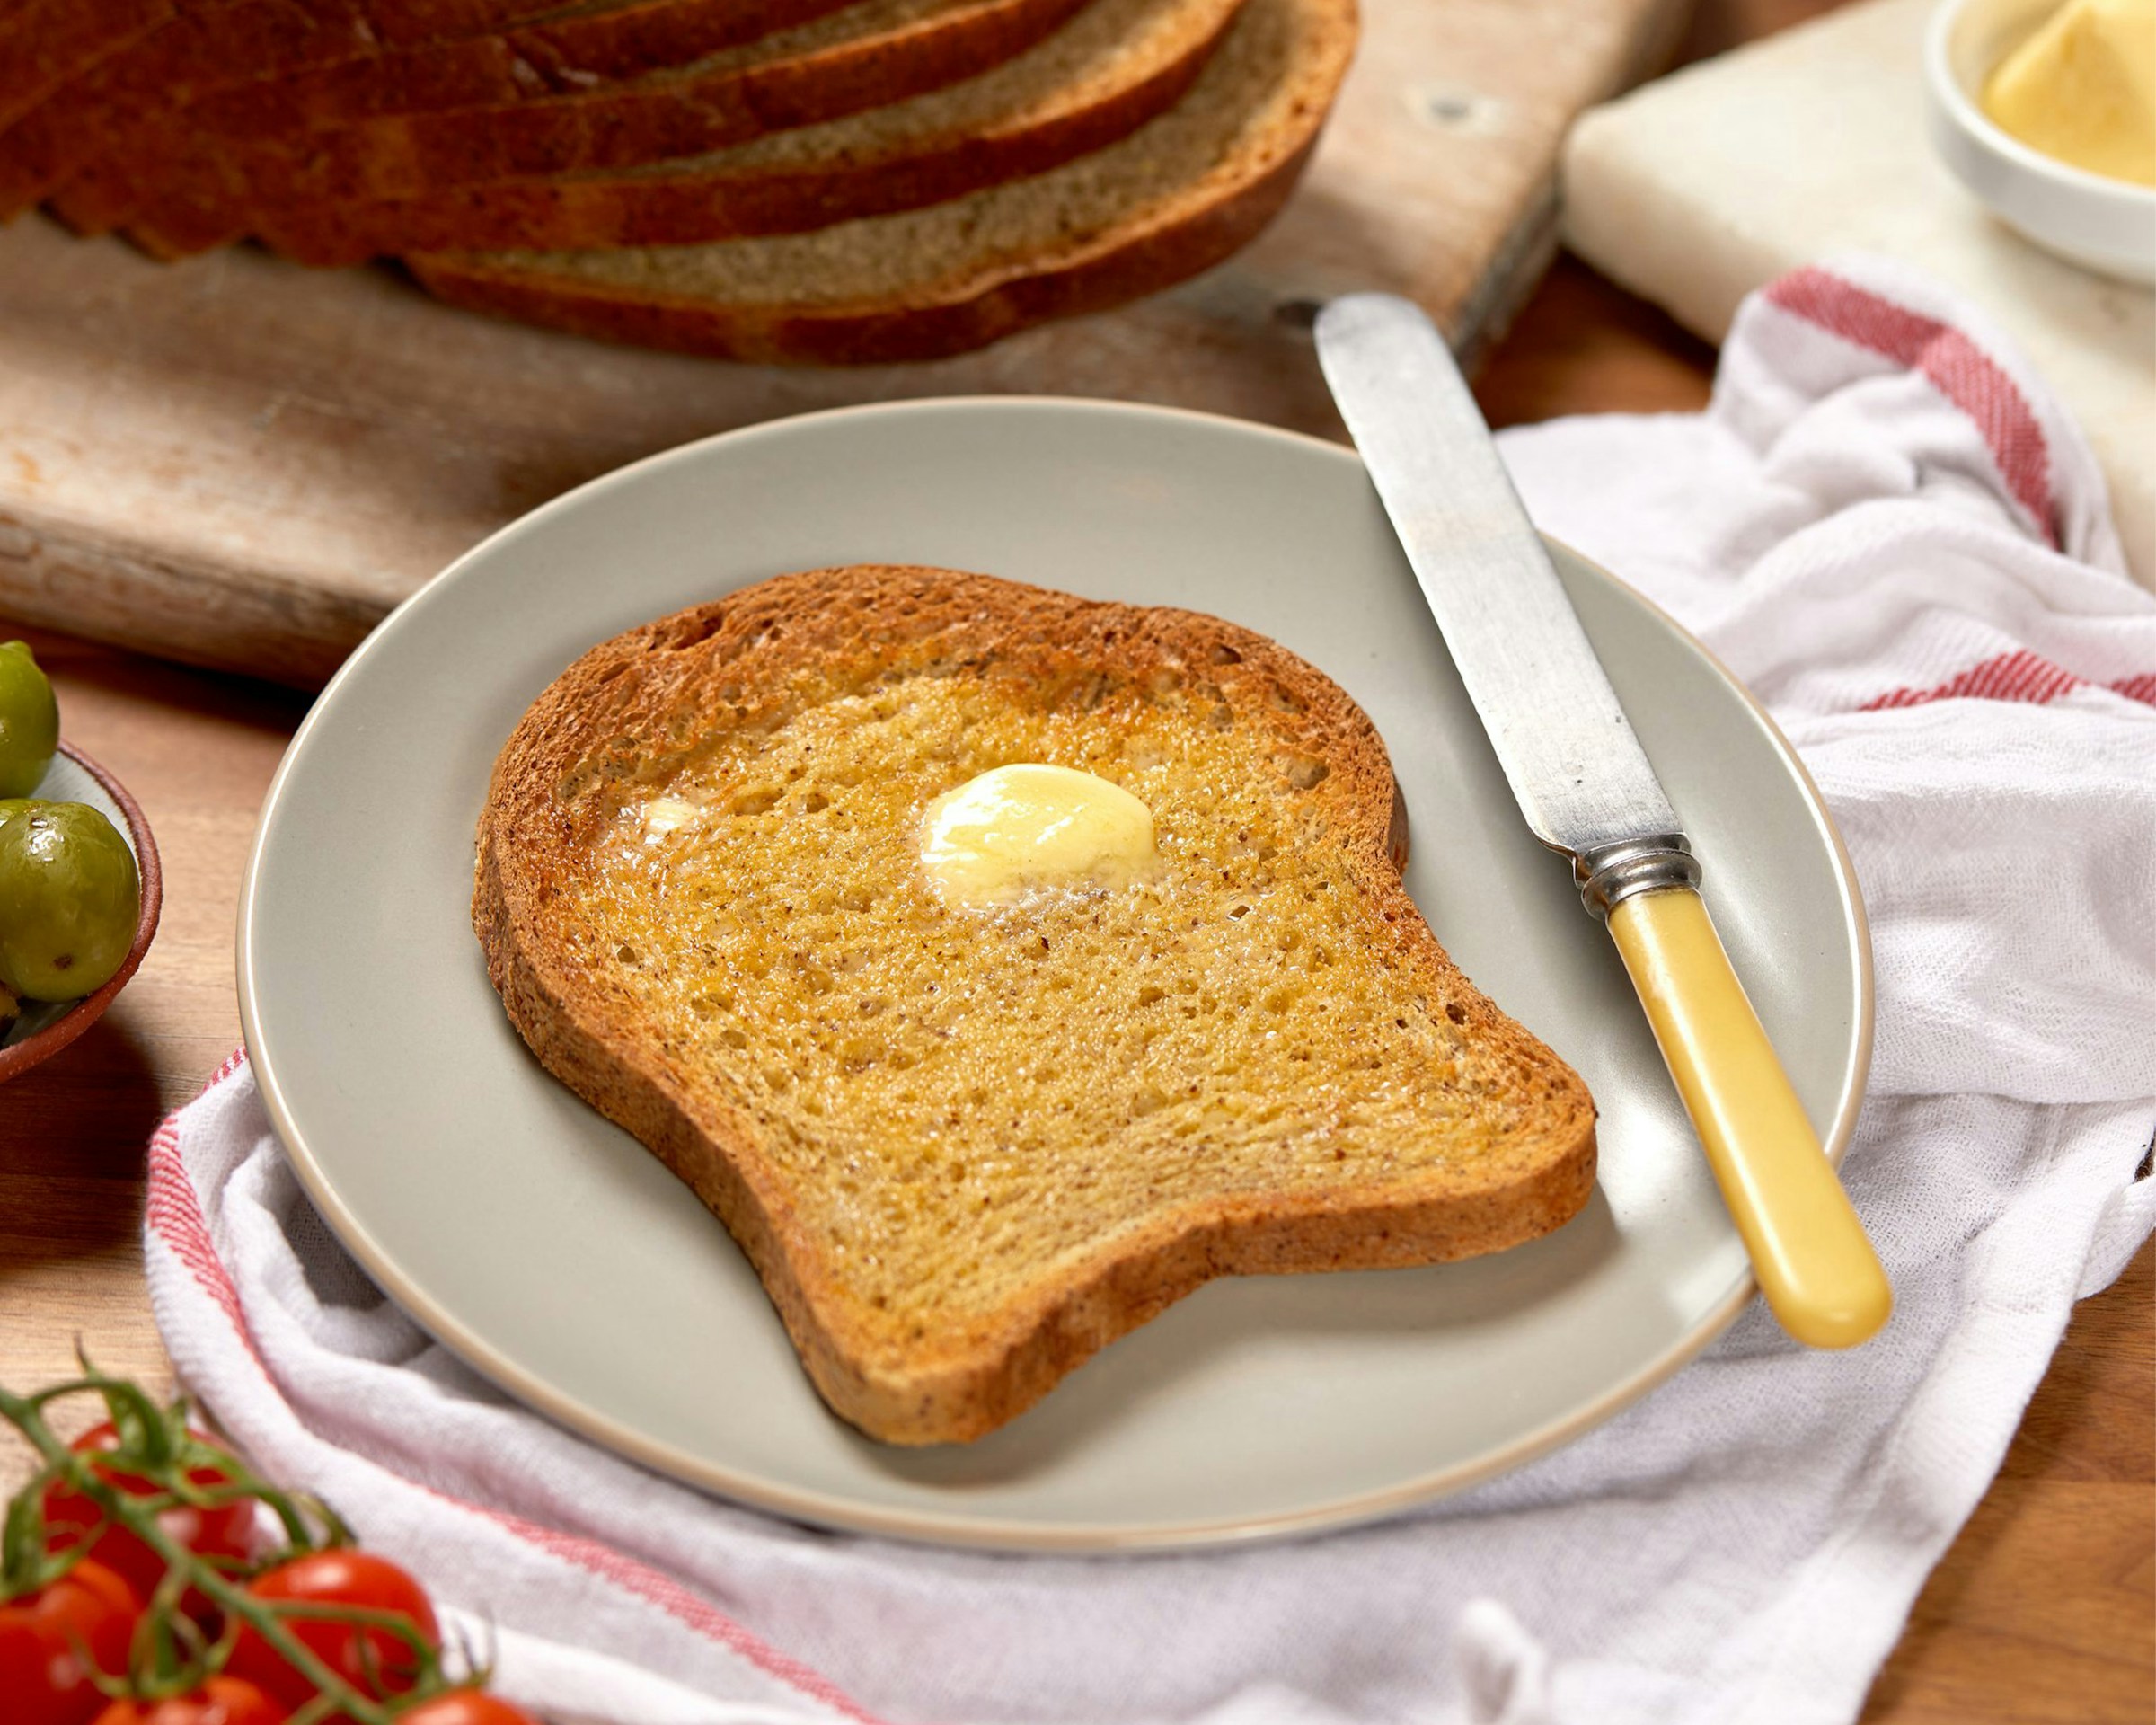 Buttered toast on a plate | Source: Unsplash